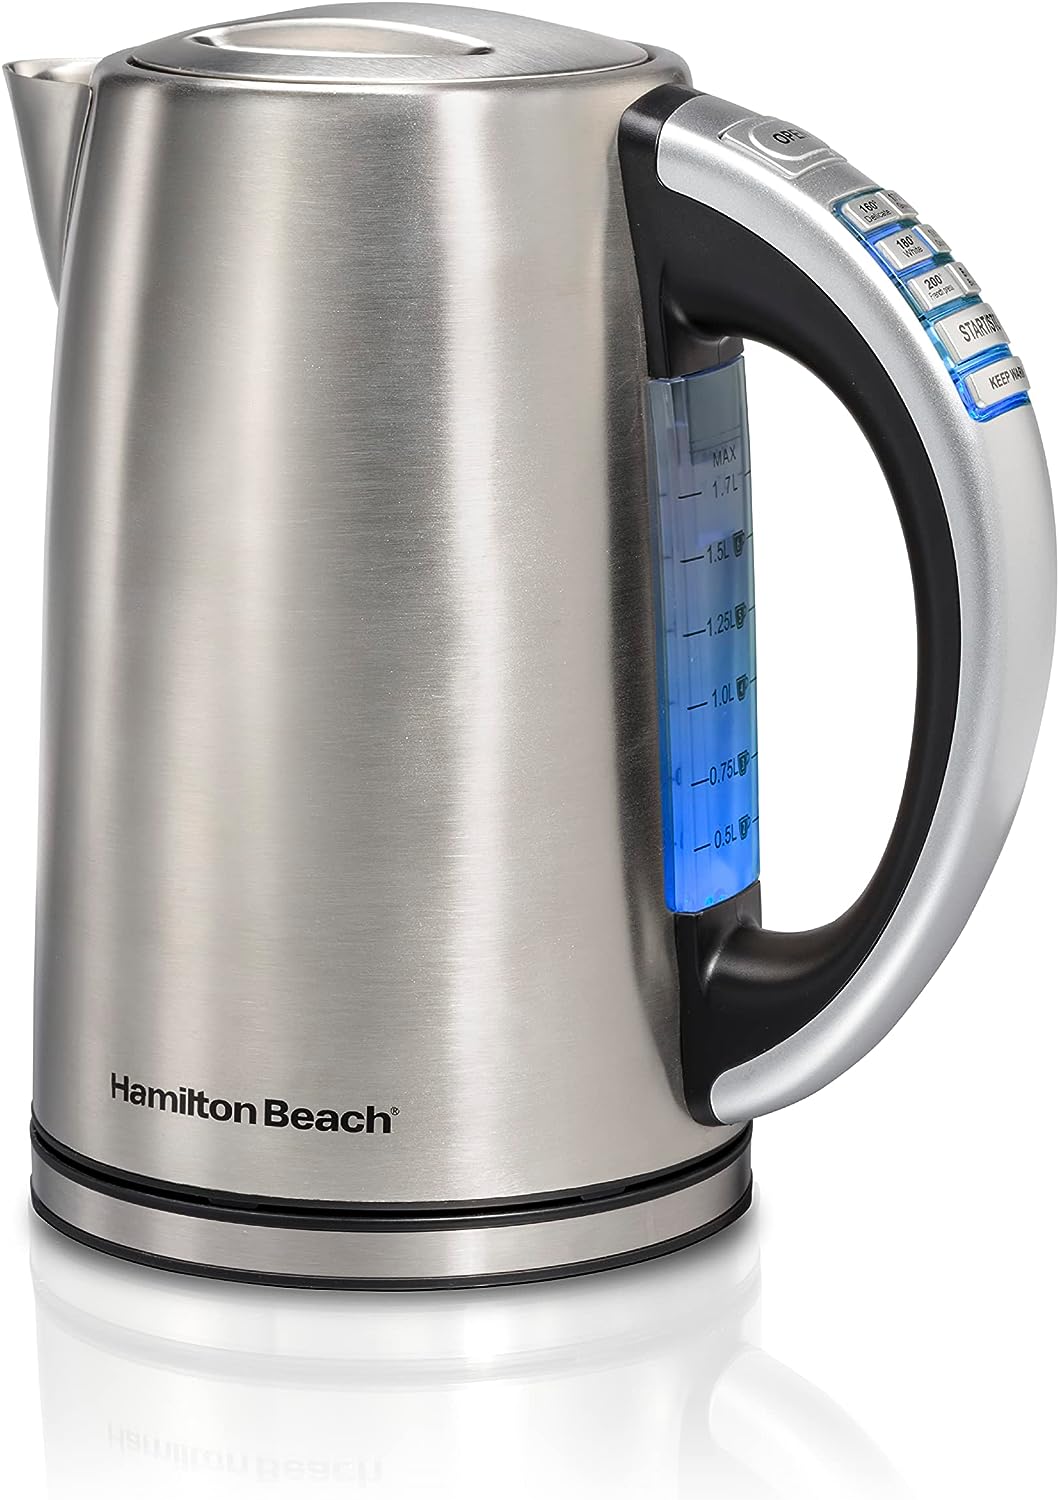 Hamilton Beach 41020C Temperature Control Electric Tea Kettle, Water Boiler  Heater, 1.7 Liter, Fast 1500 Watts, BPA Free, Cordless, Auto-Shutoff and Boil-Dry Protection, Stainless Steel